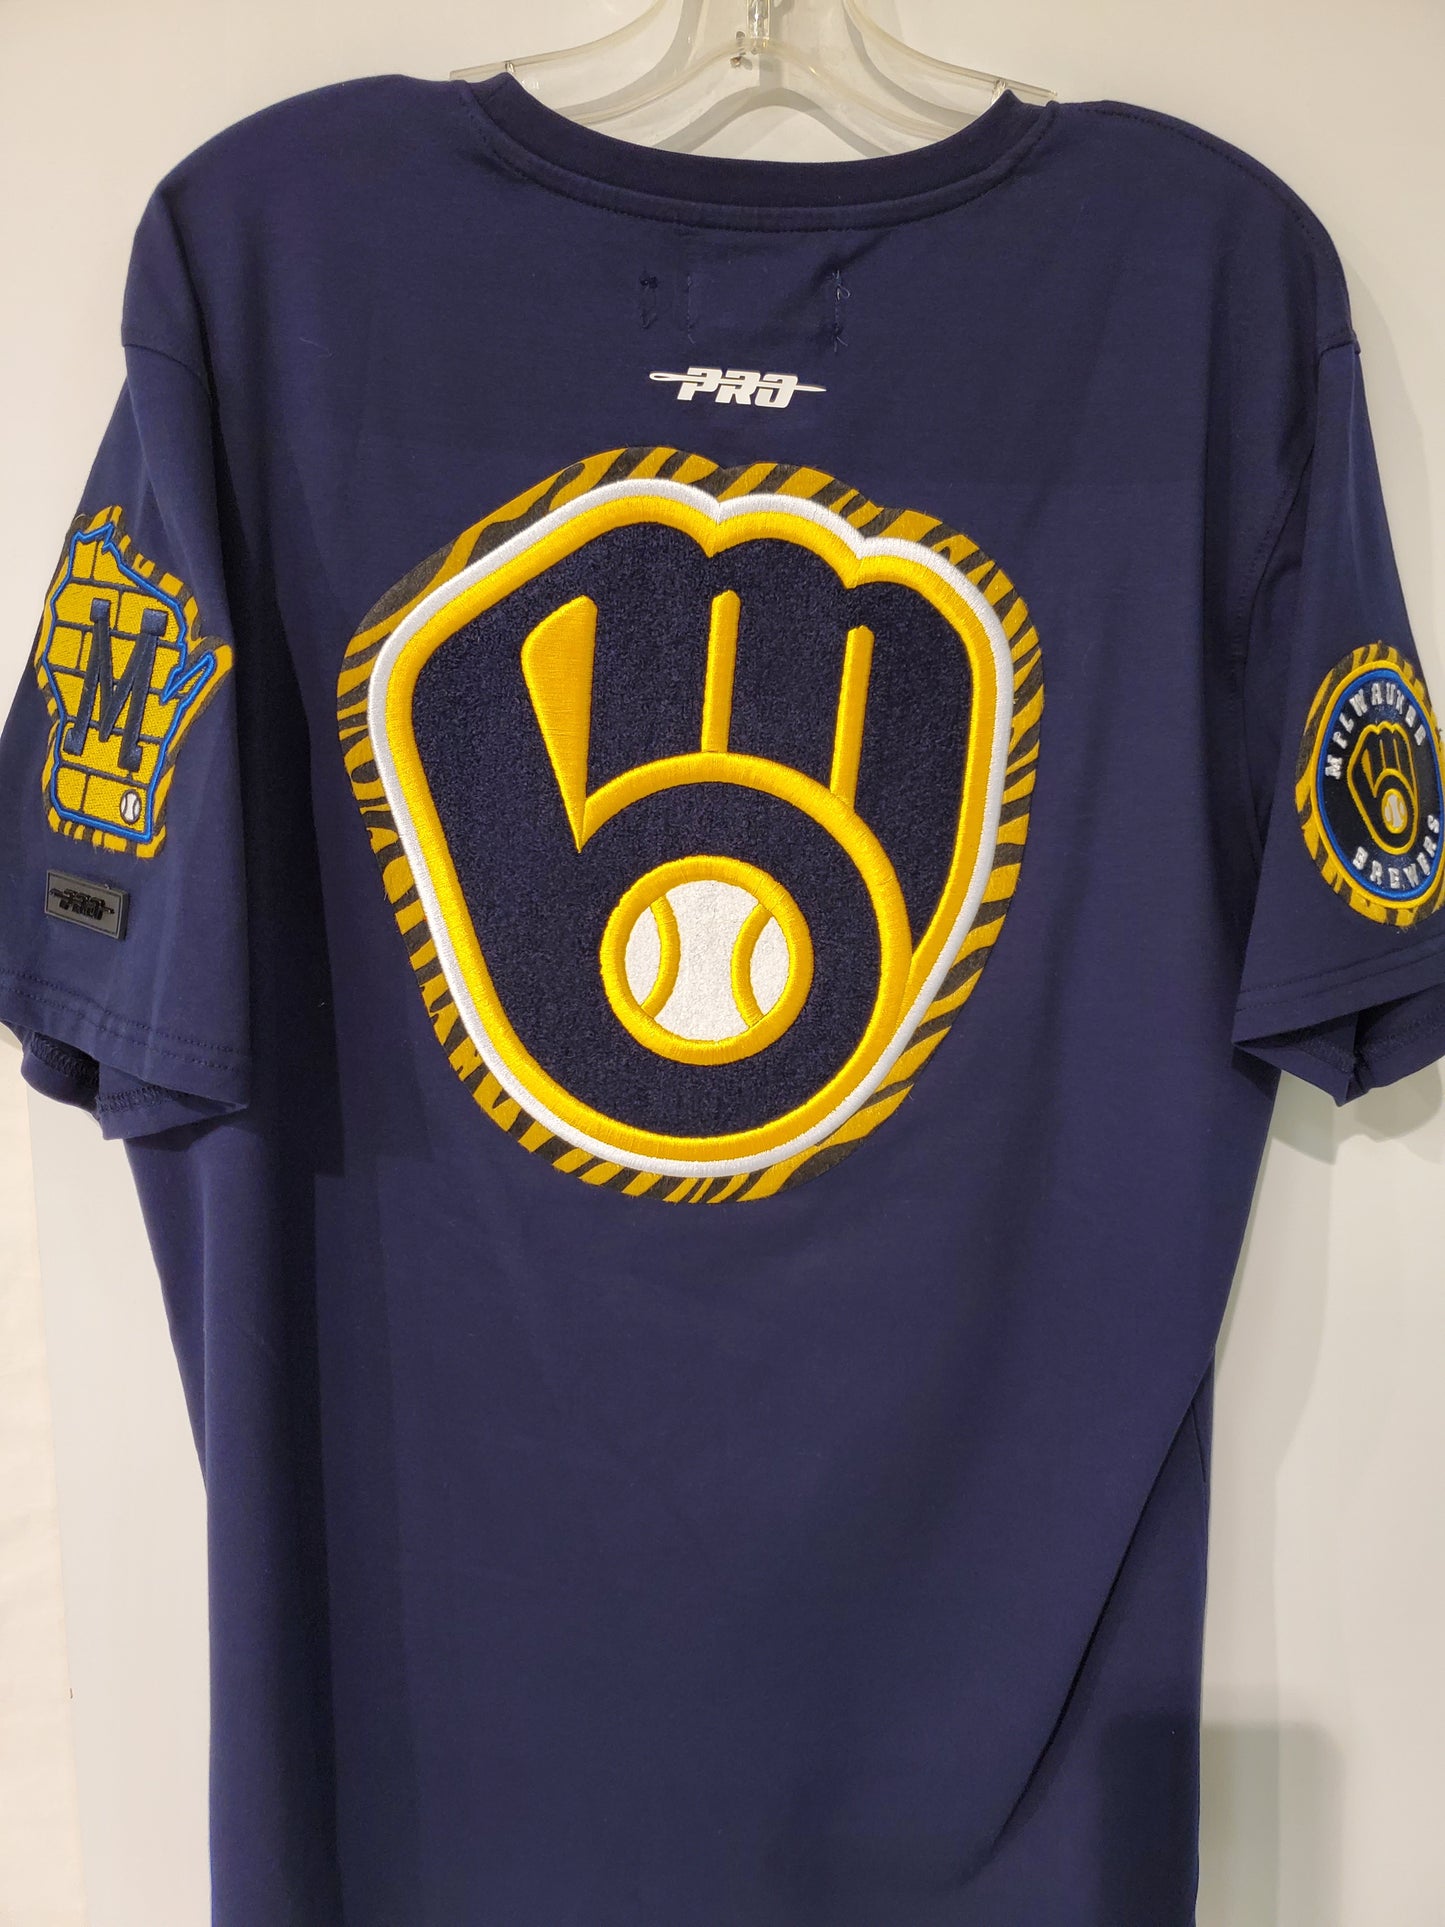 Milwaukee Brewers Shirt Navy Blue with Yellow Patches